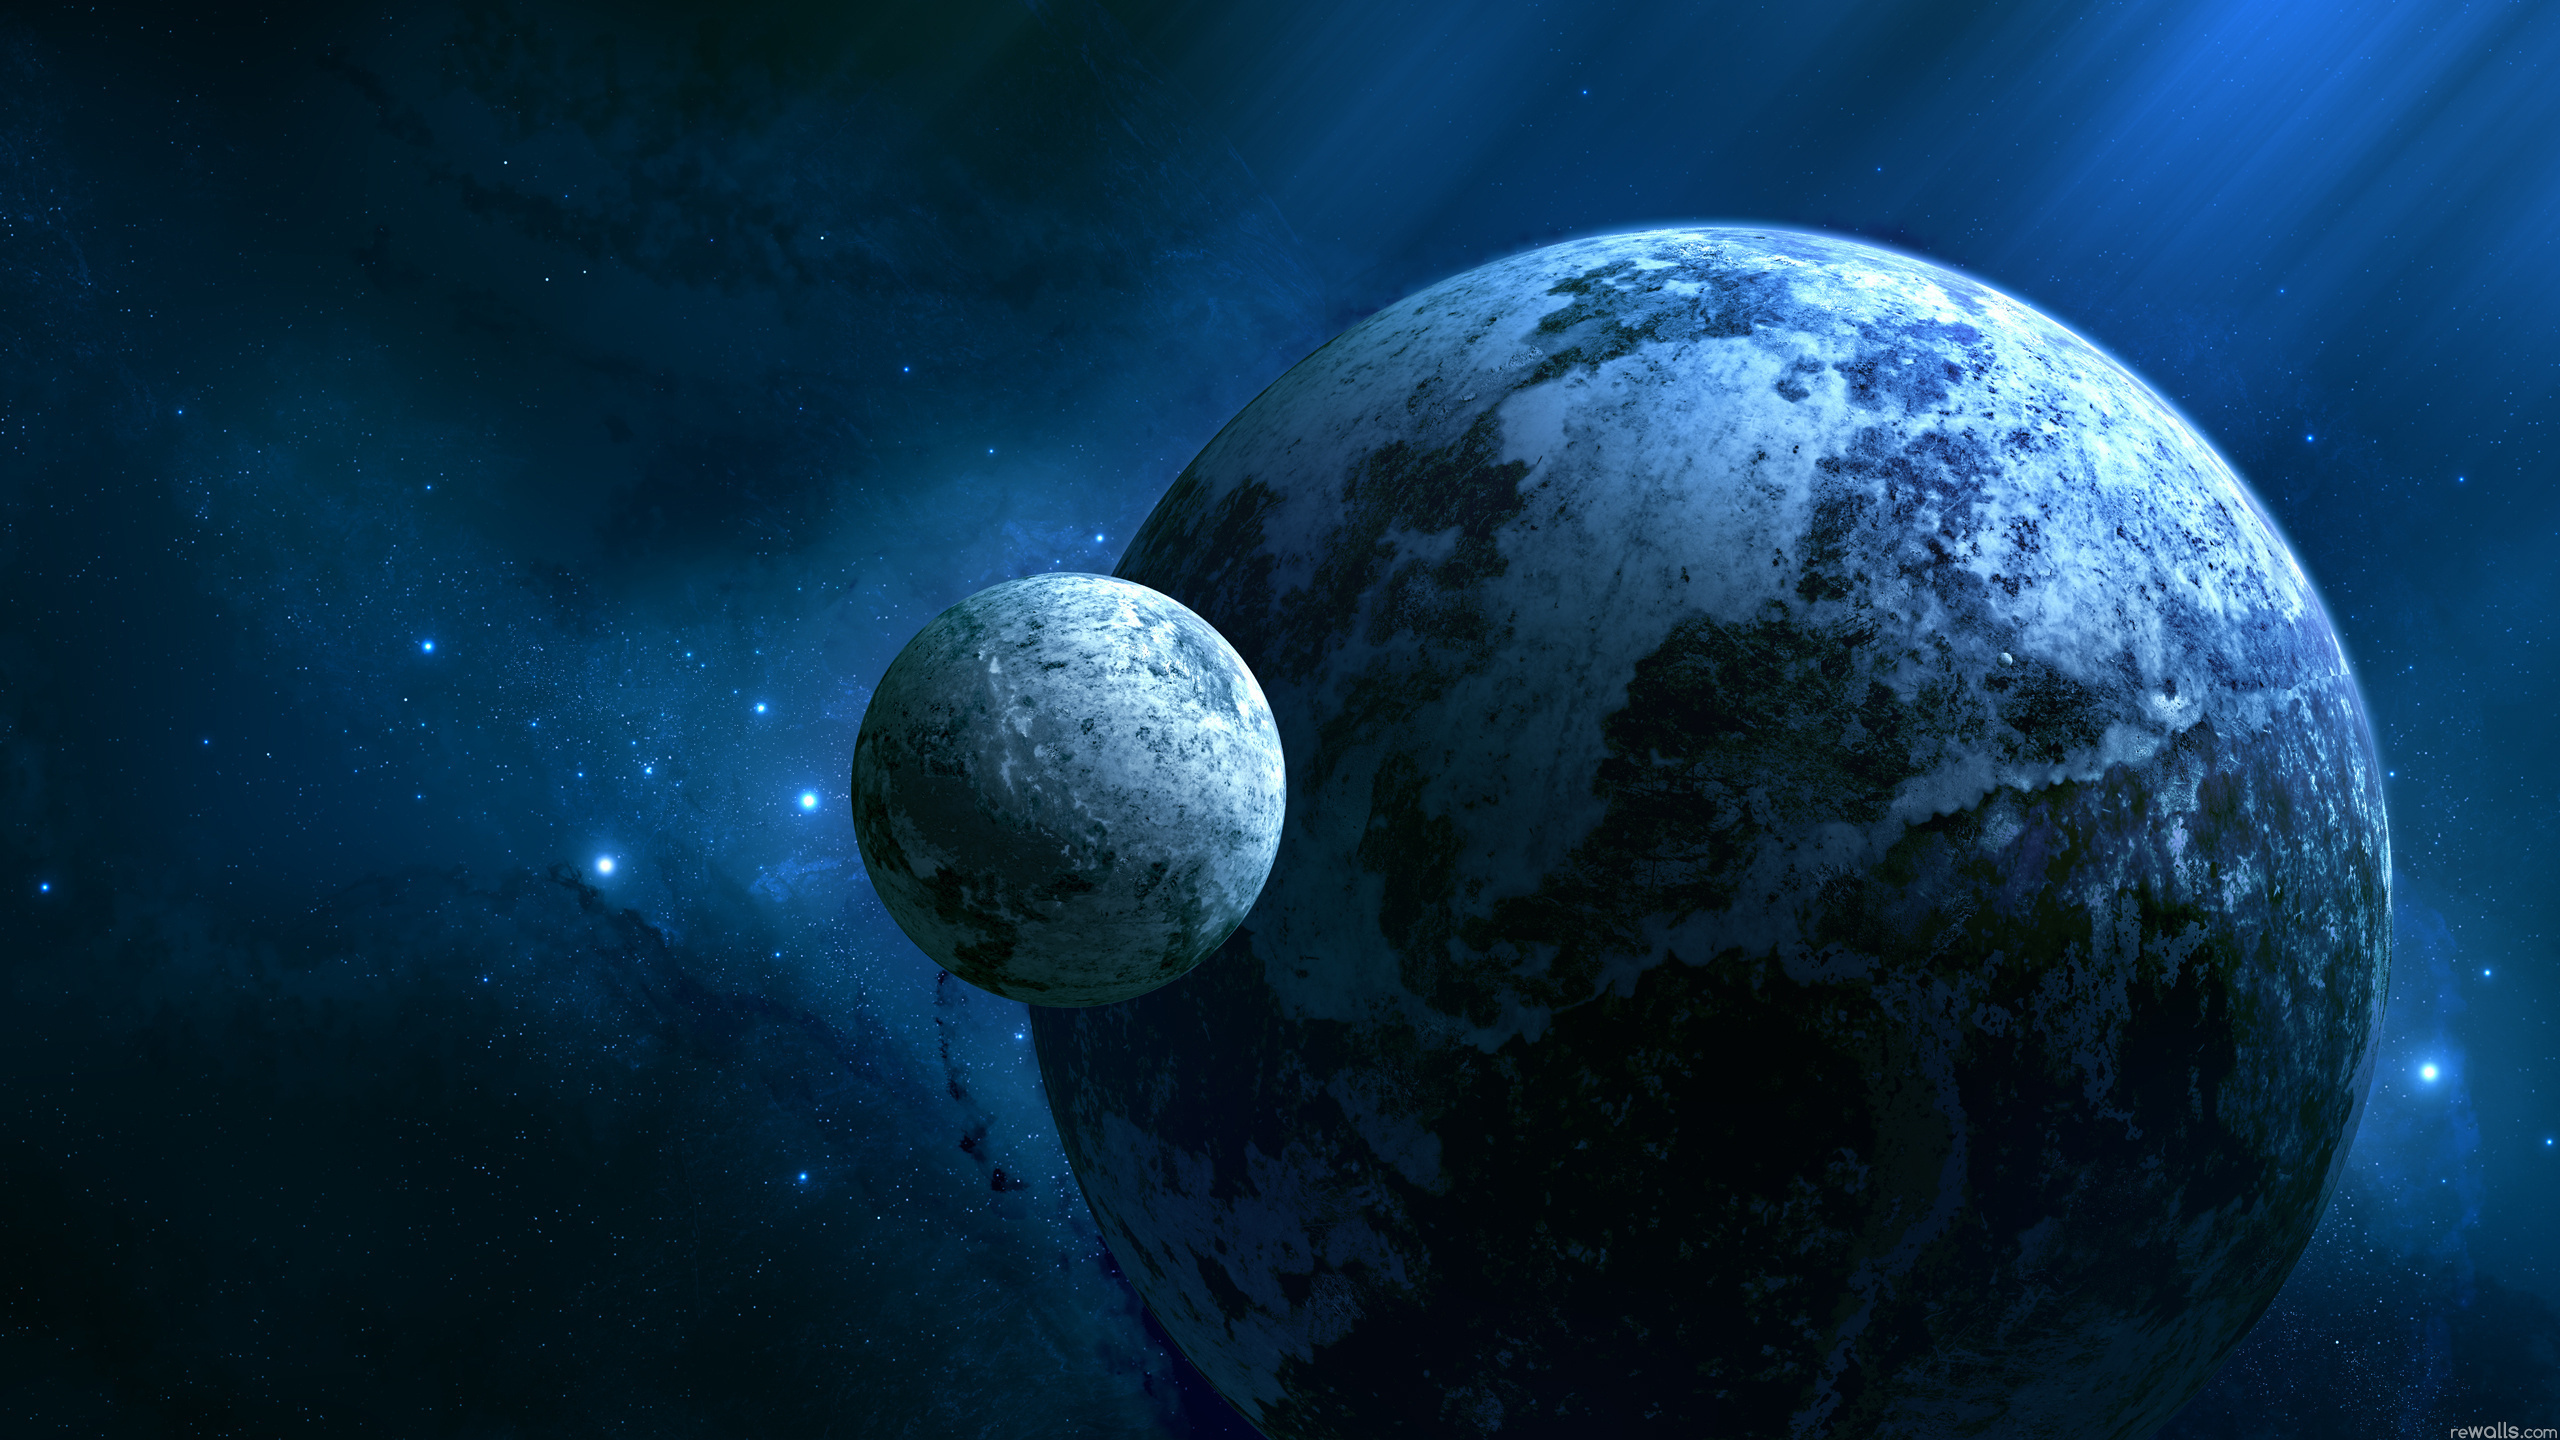 Planets HD Wallpaper | Background Image | 2560x1440 | ID ...